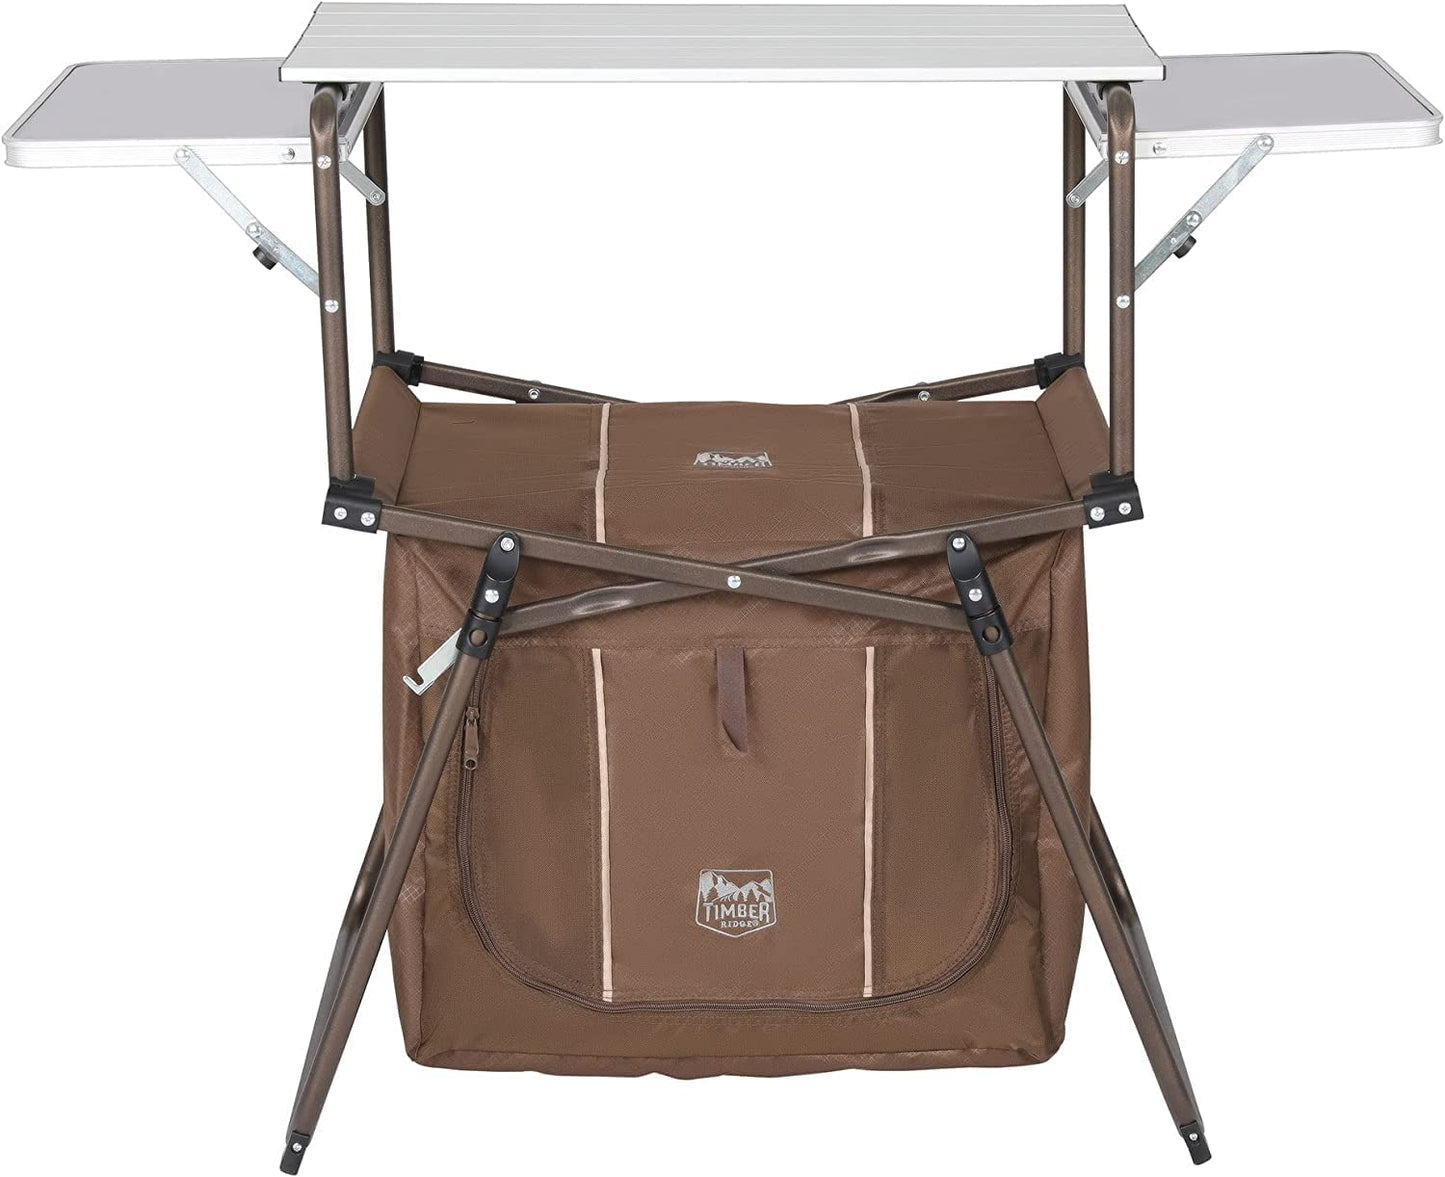 Timber Ridge Portable Camp Table with Pantry